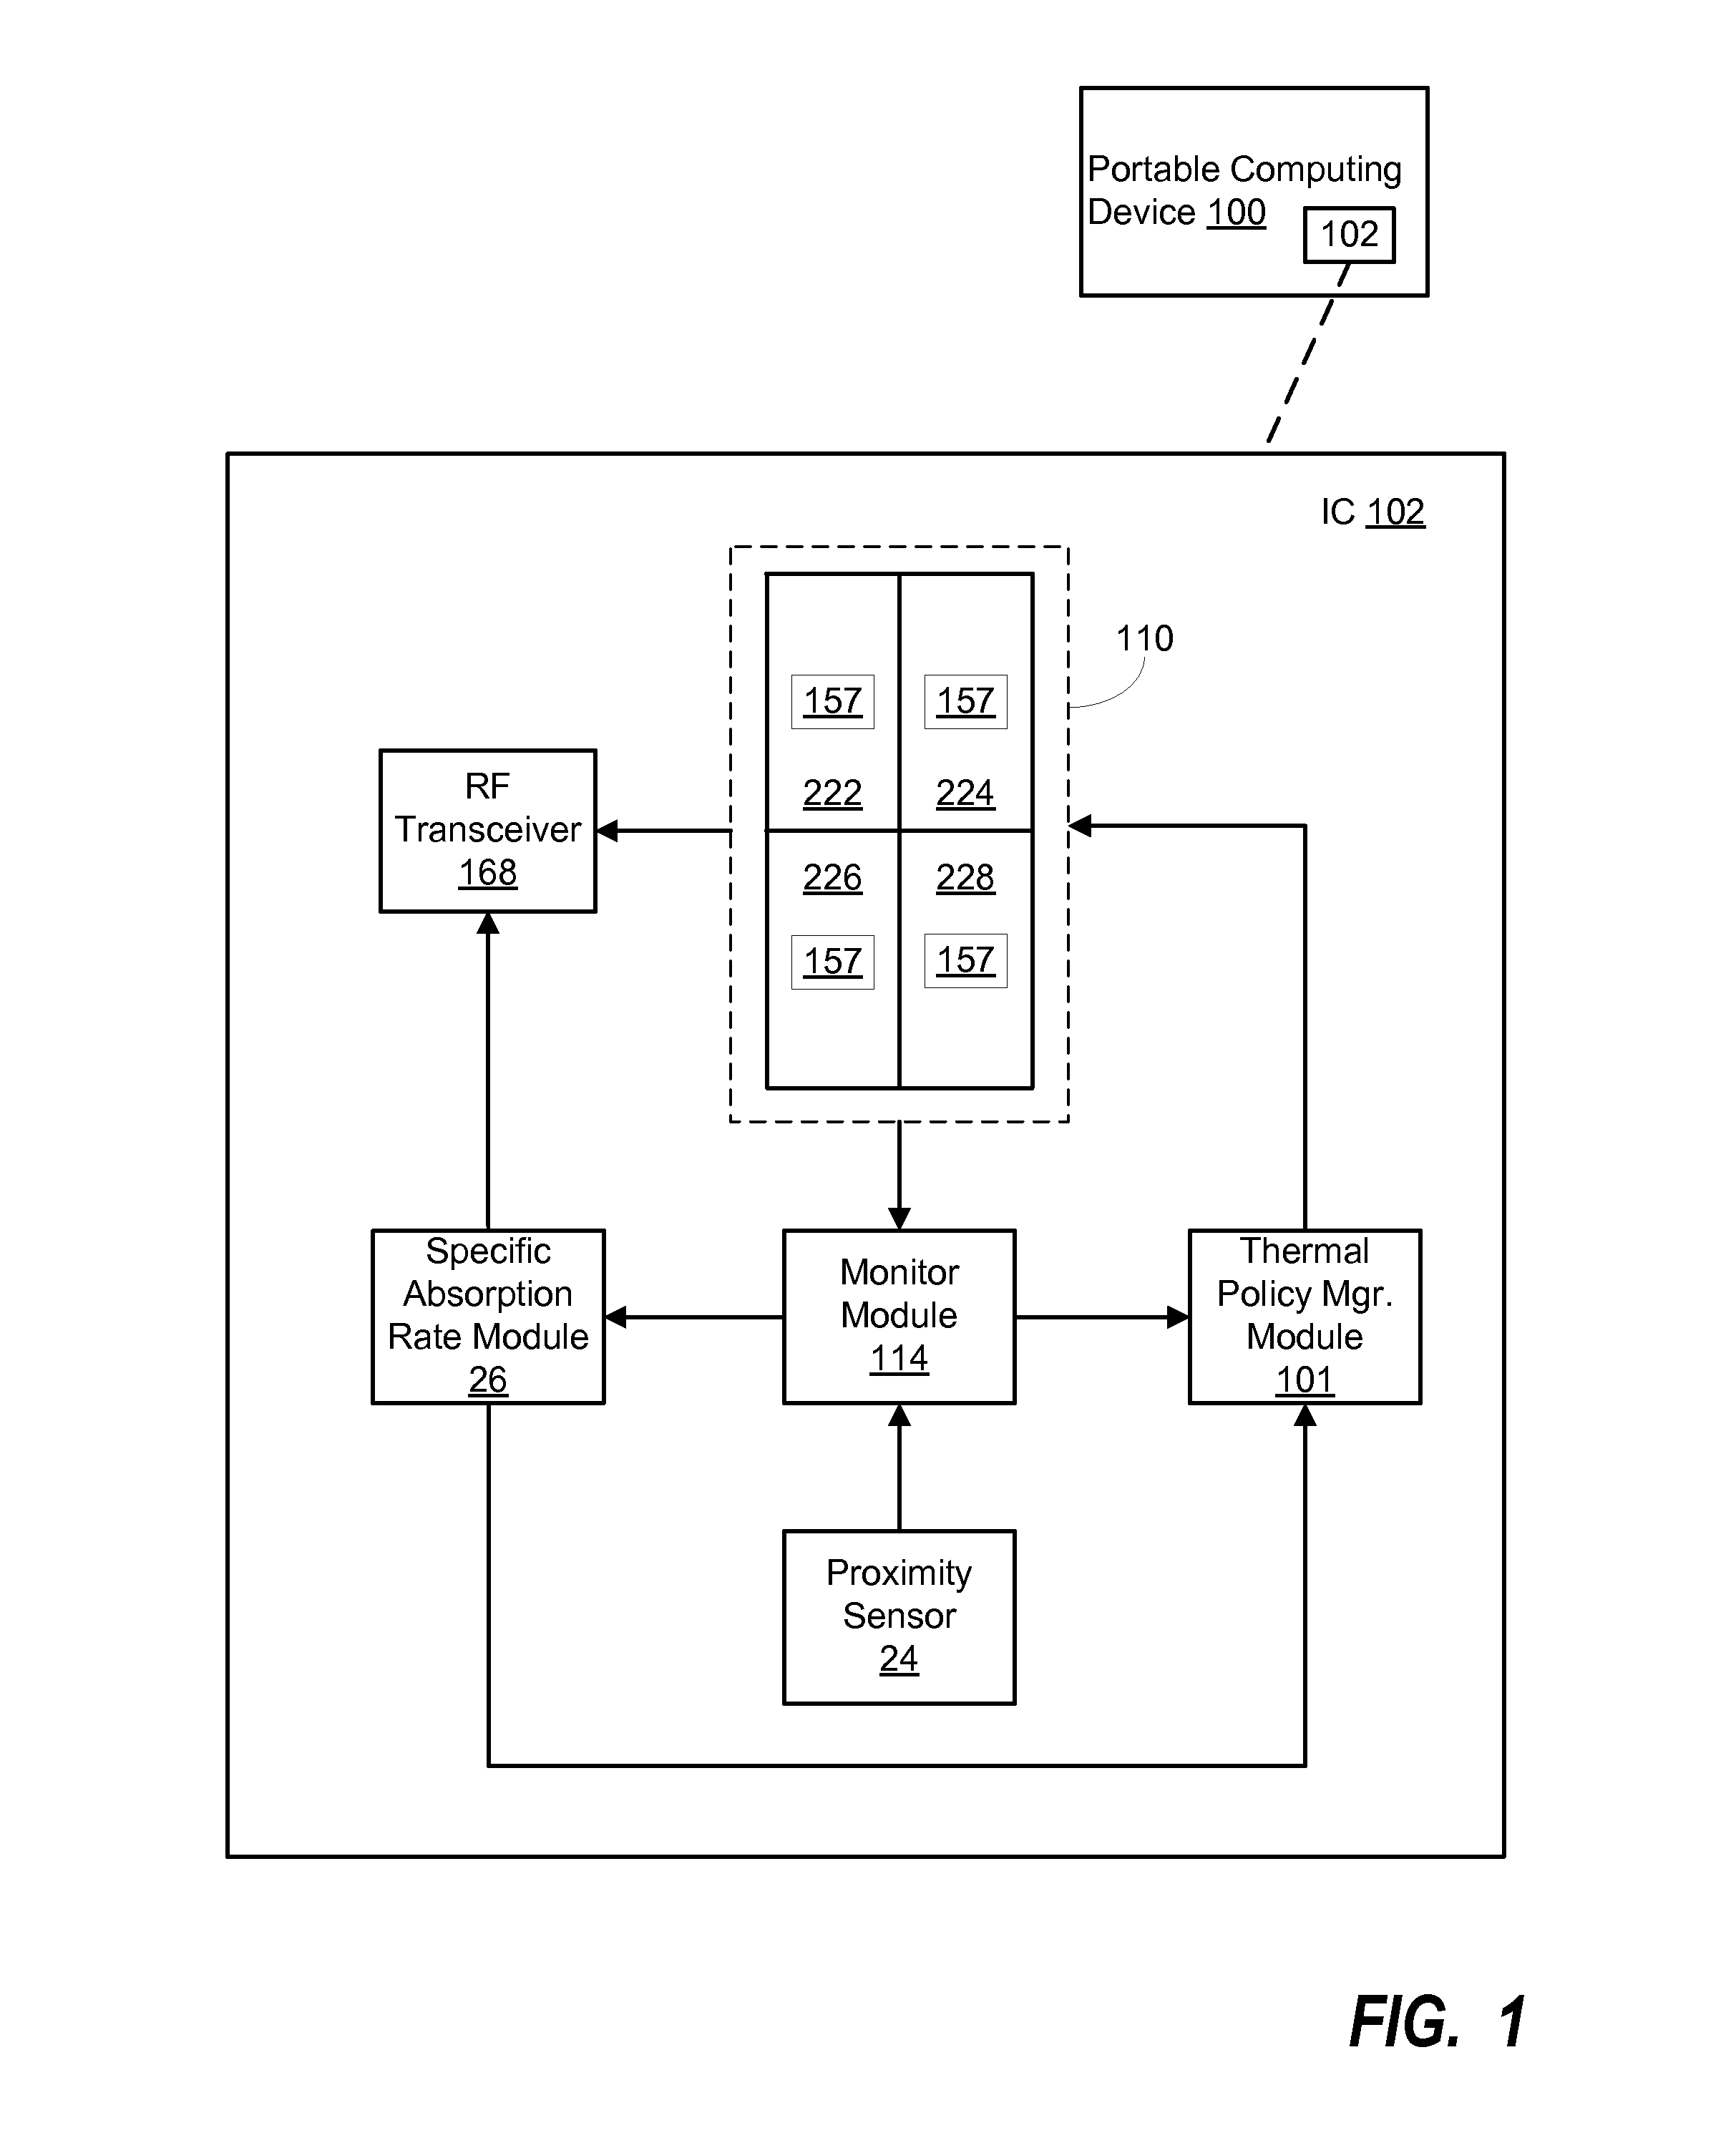 System and method for proximity based thermal management of mobile device